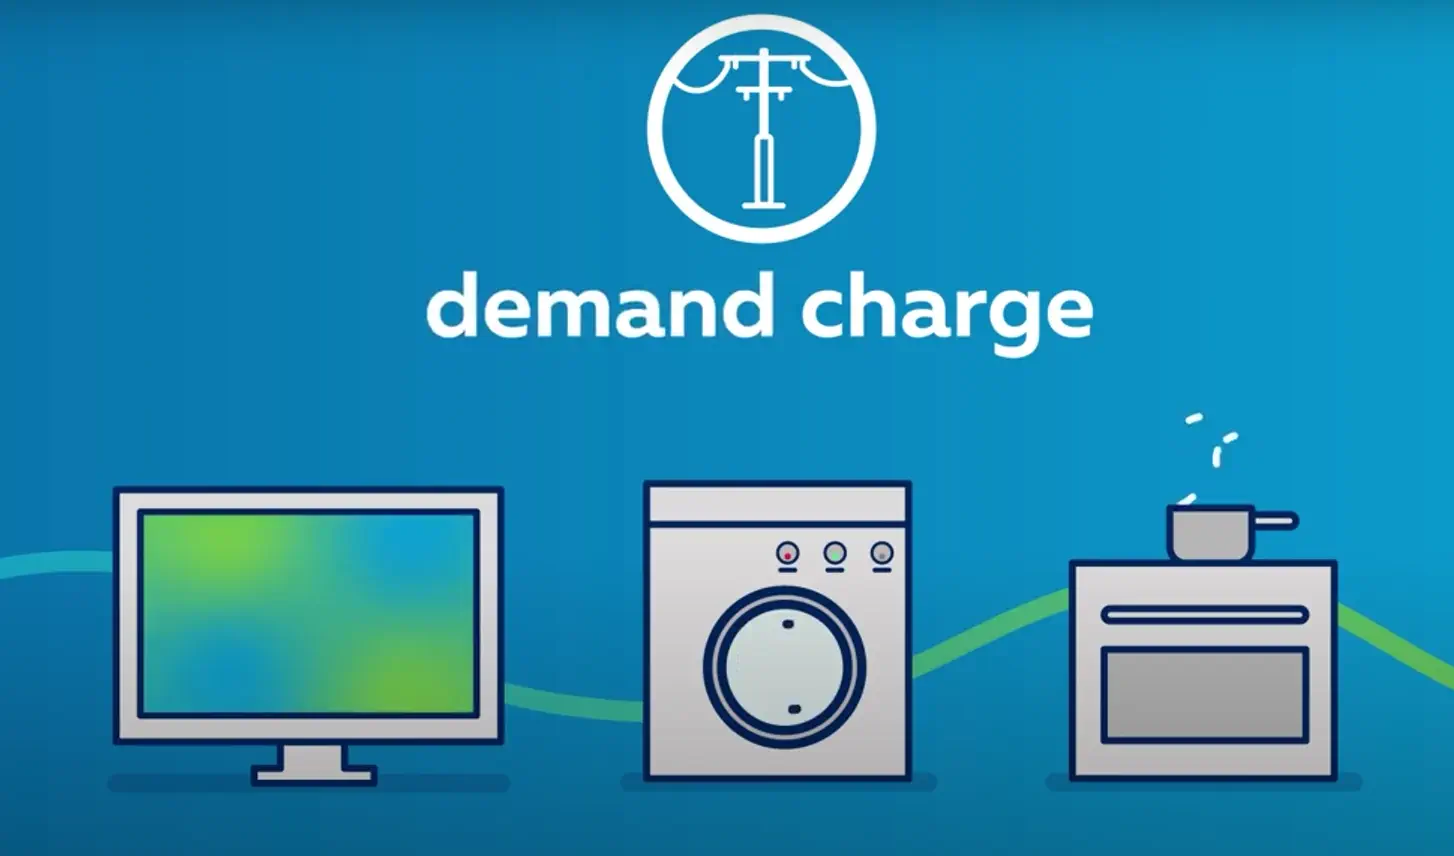 Quit Demand Charge: NSW Homes Can Switch to Time of Use Electricity Tariff